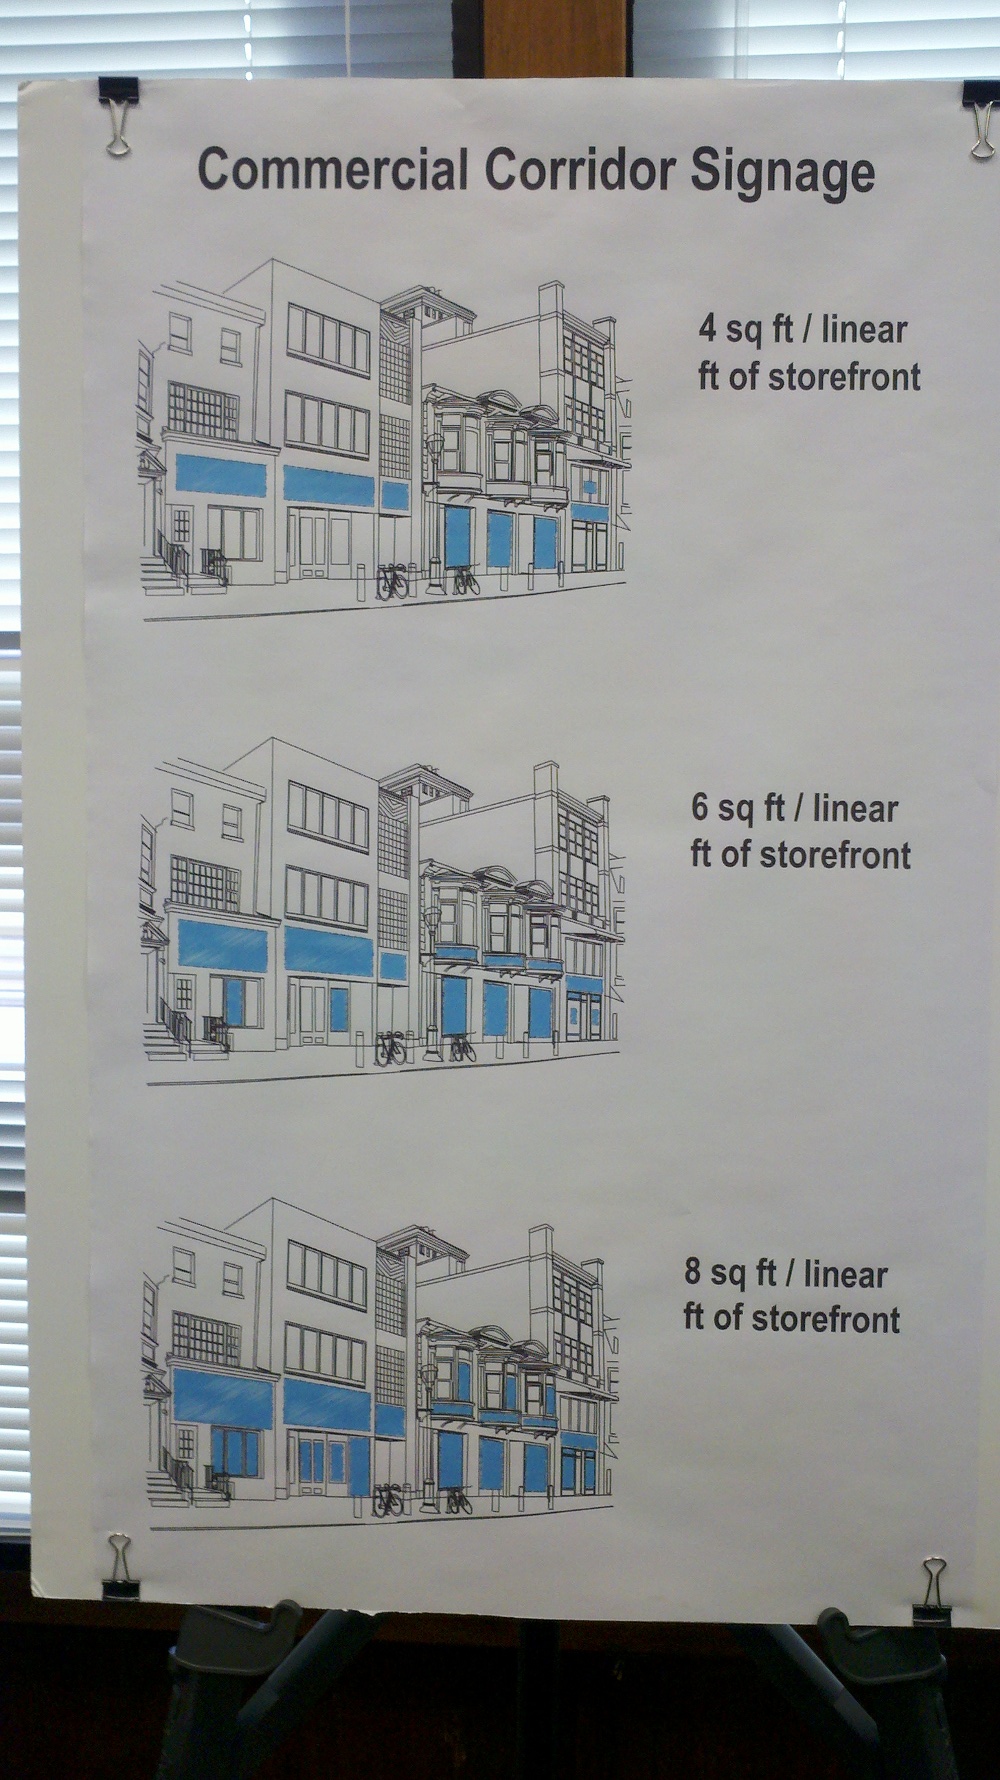 Comparing different possible C2 store-front sign limits